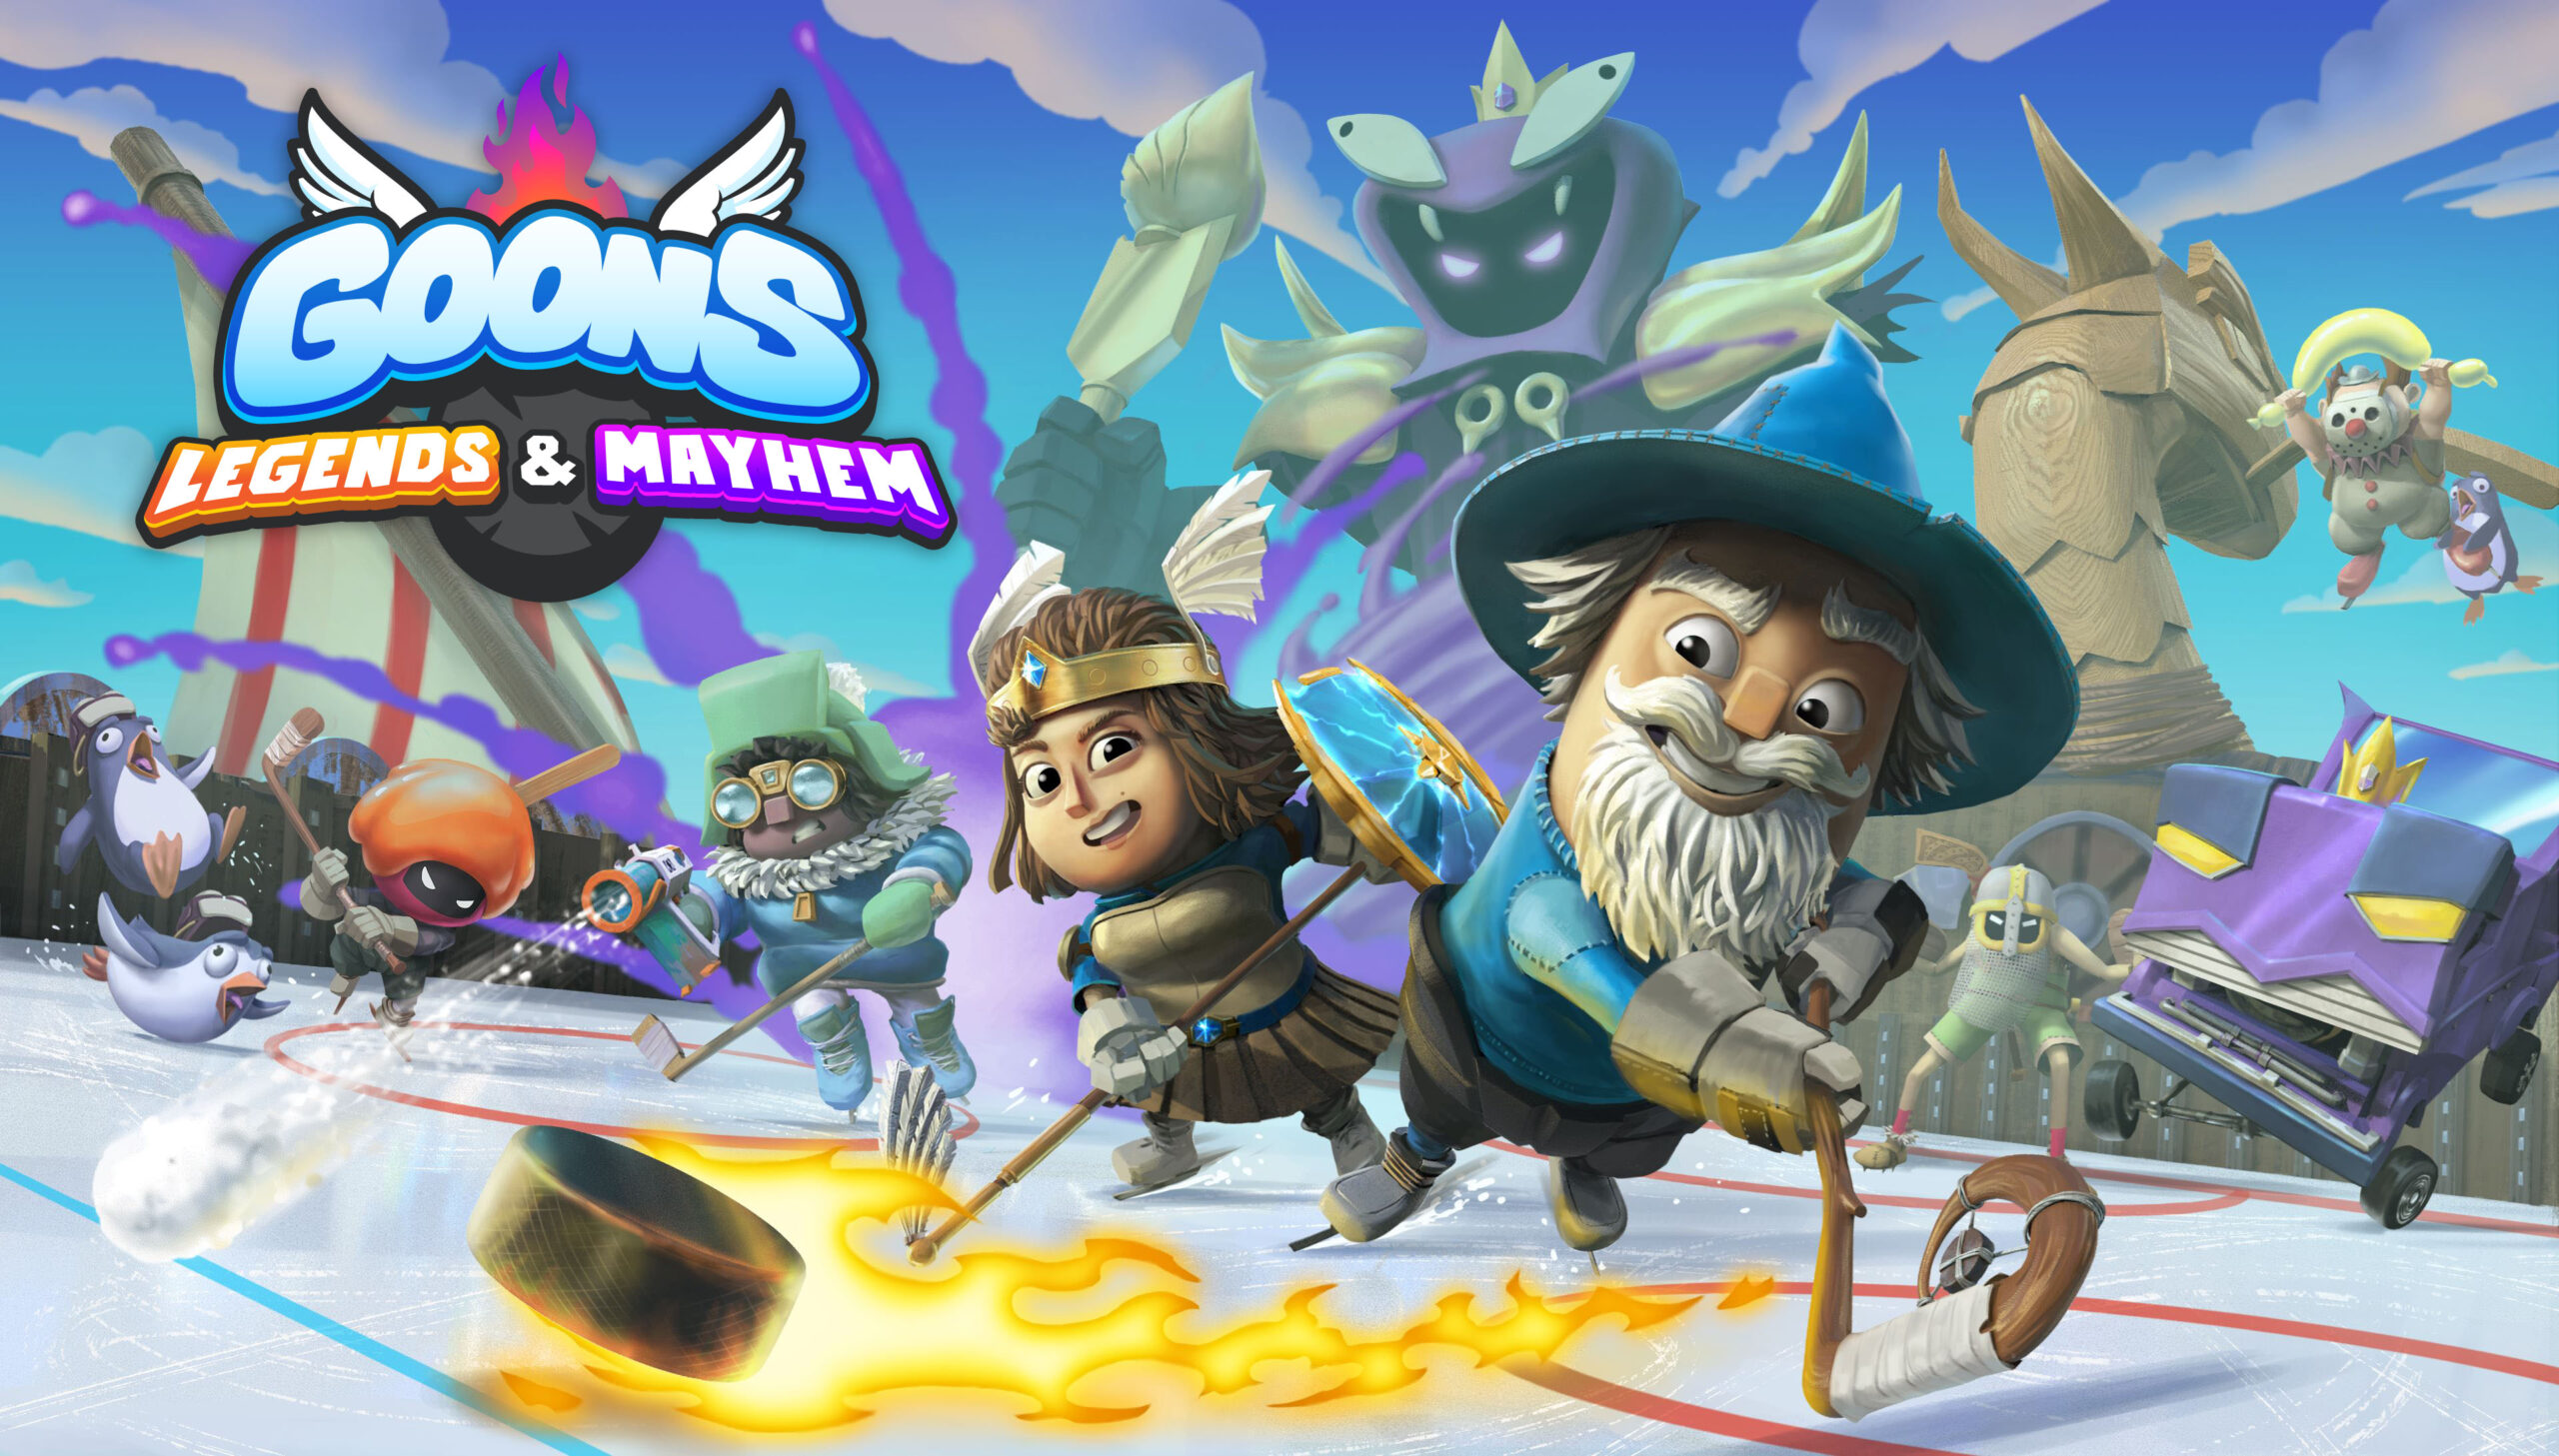 Hockey action game Goons: Legends & Mayhem launches in 2023